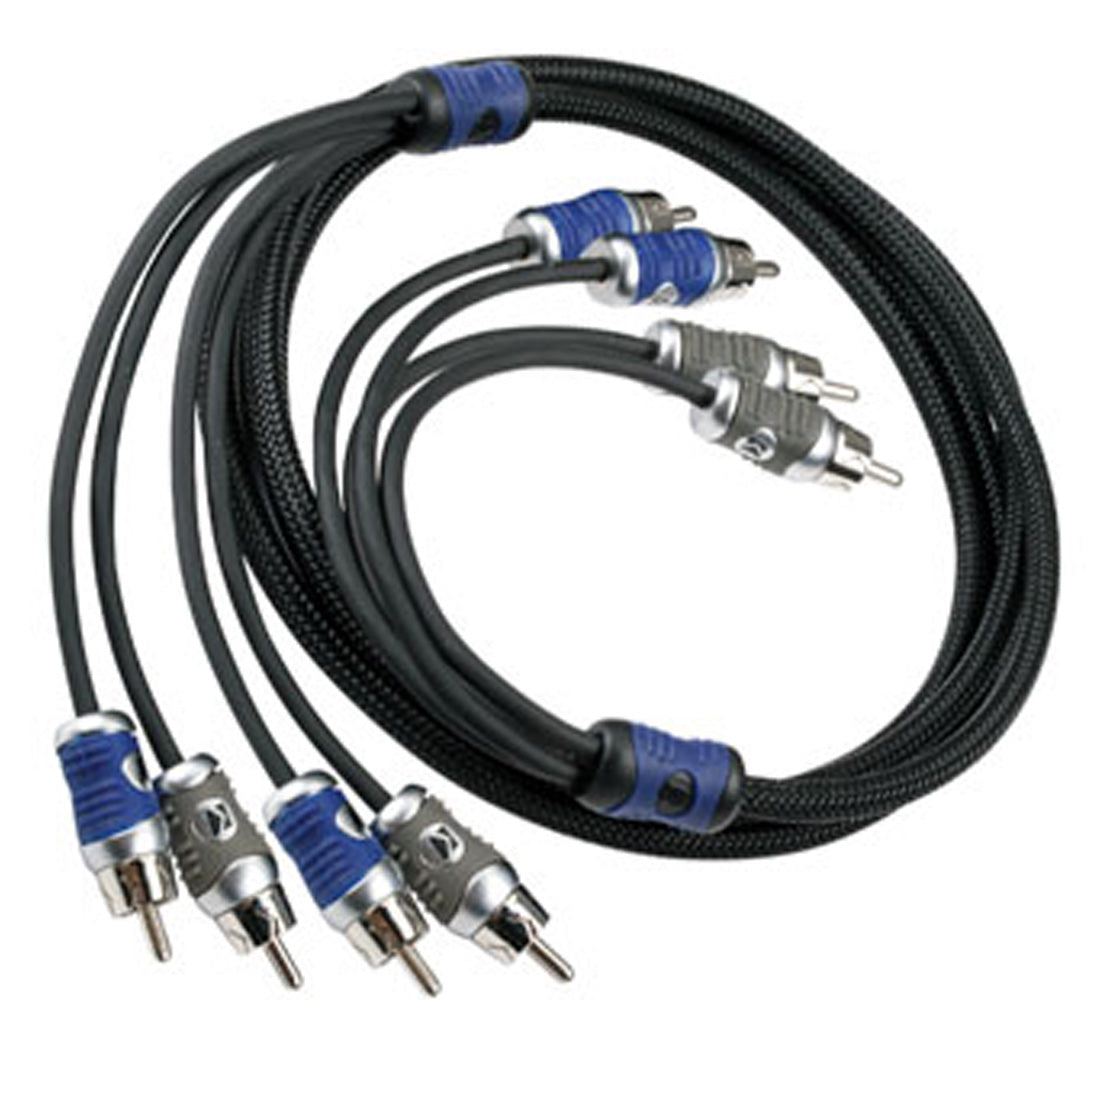 Kicker 46QI44 Q-Series 4-Channel RCA Signal Cable - 4 Meters